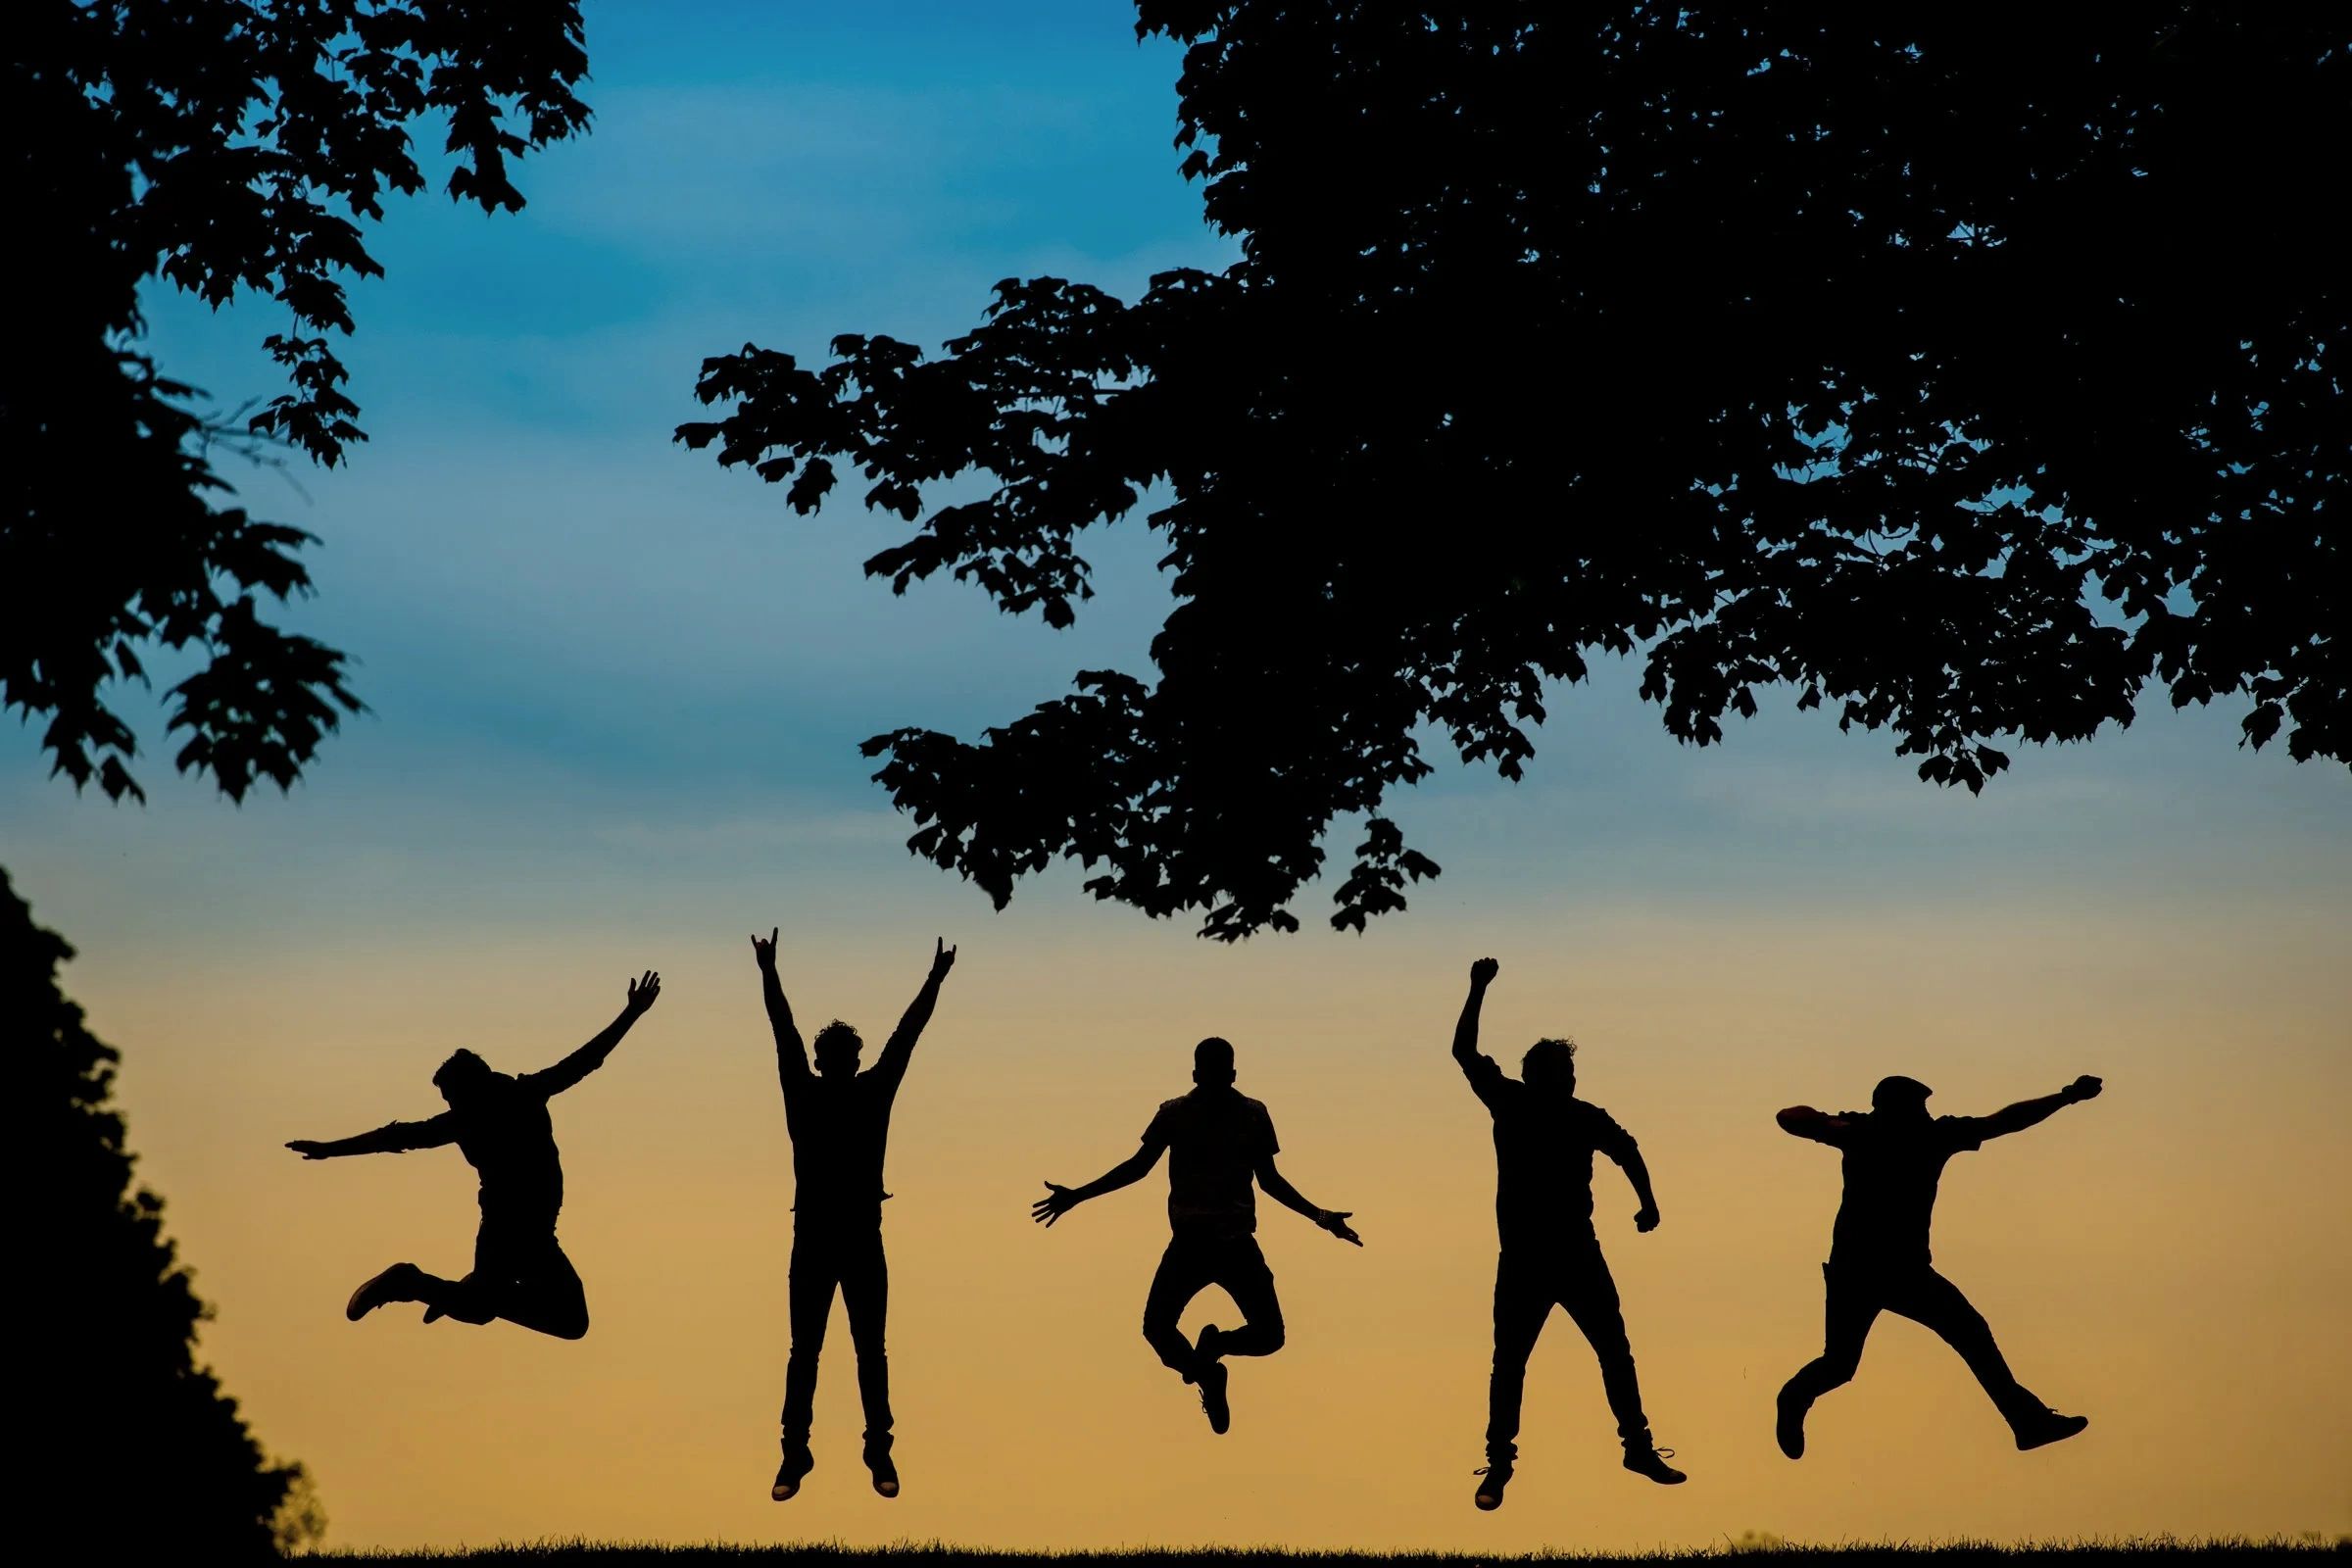 Five band members in silhouette at sunset appear to be floating because they were captured mid-jump.